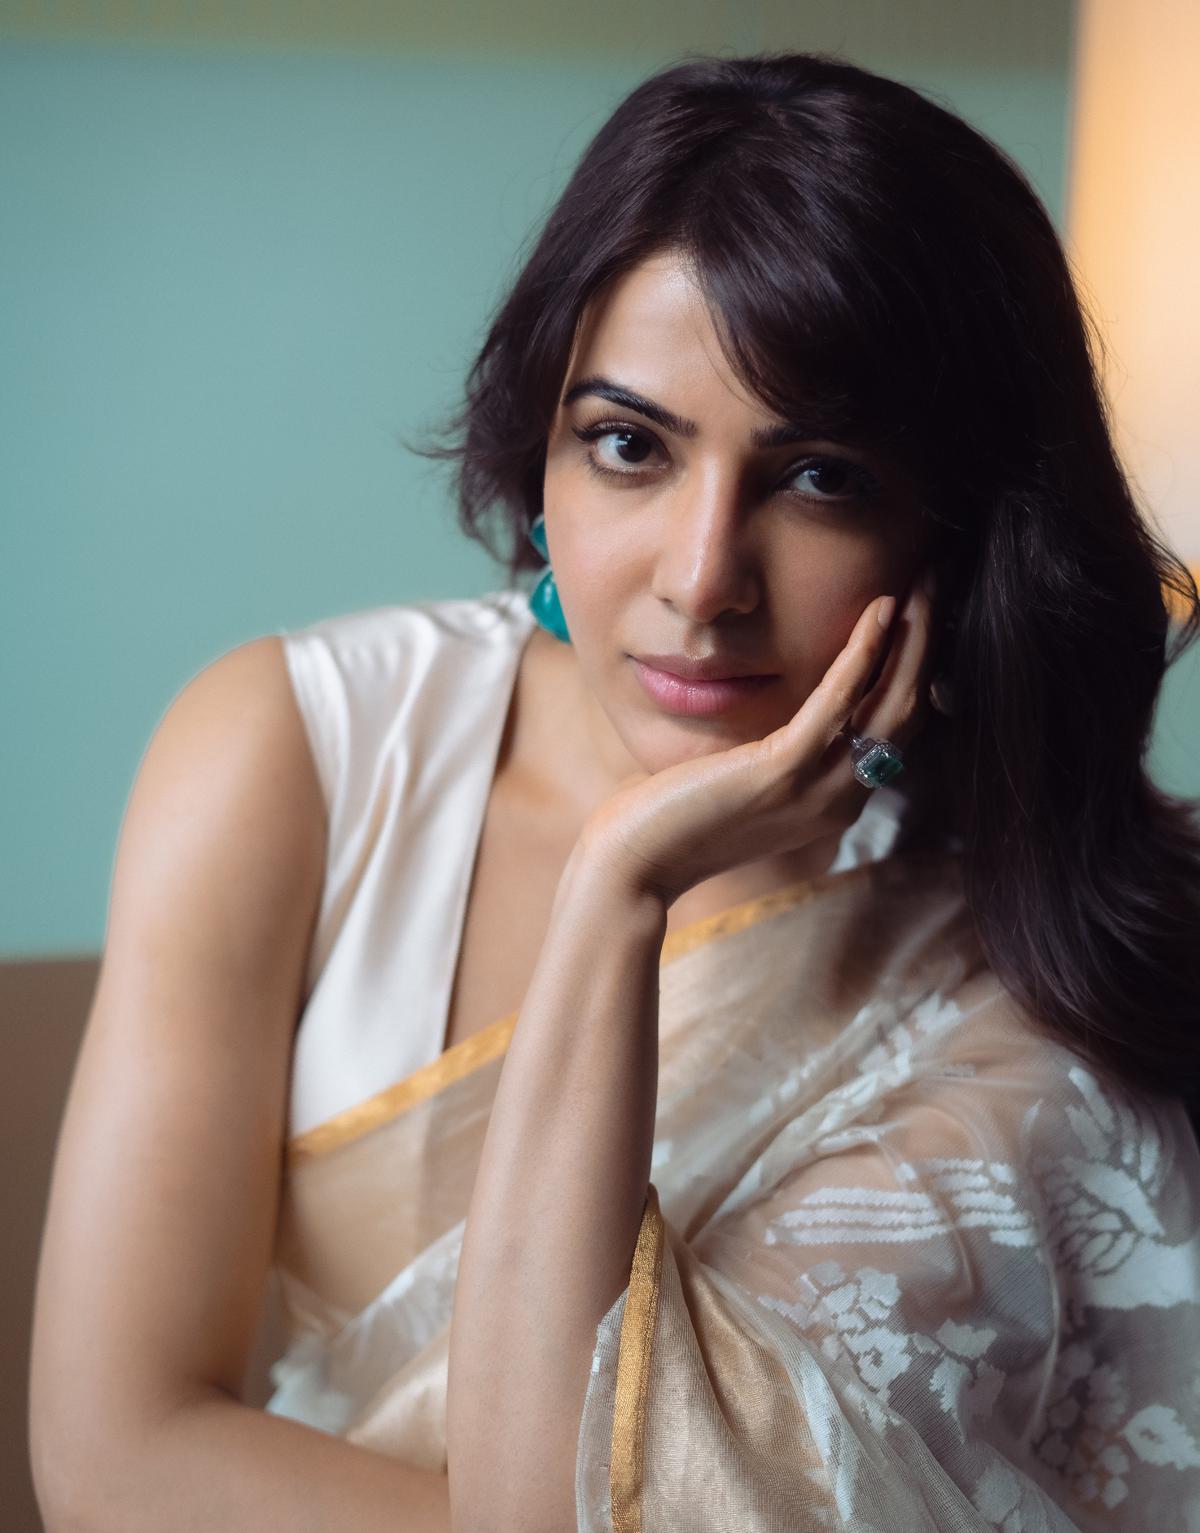 Samantha Ruth Prabhu announces return to work and plans to launch a health podcast